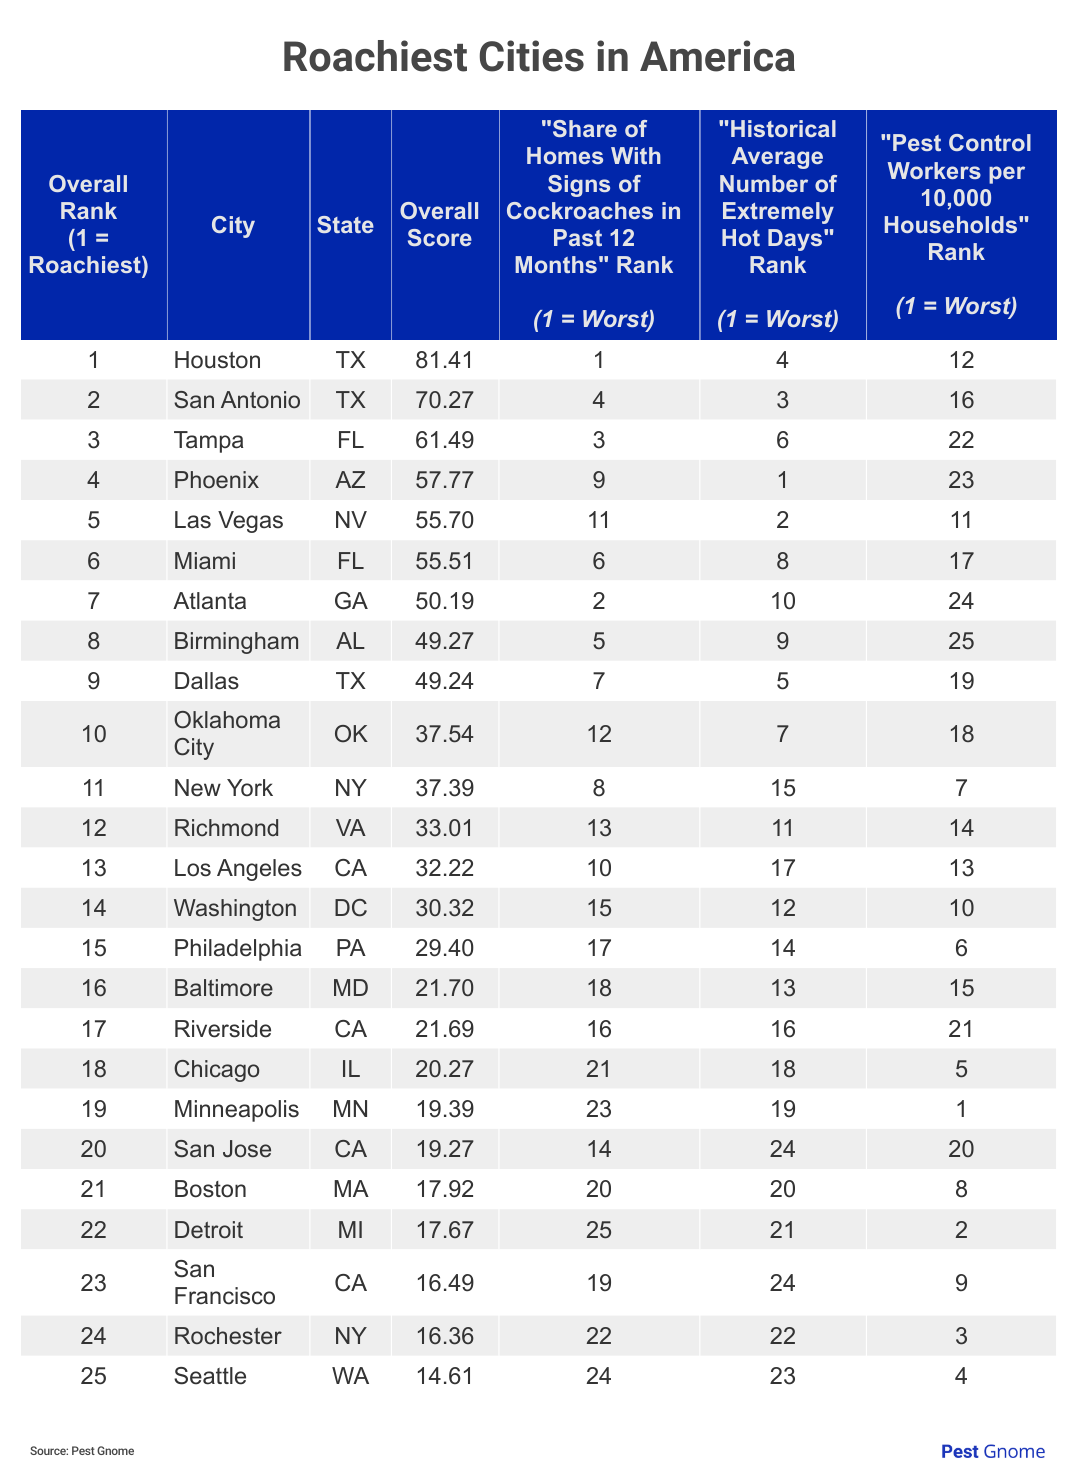 A chart showing the 25 Roachiest Cities in America